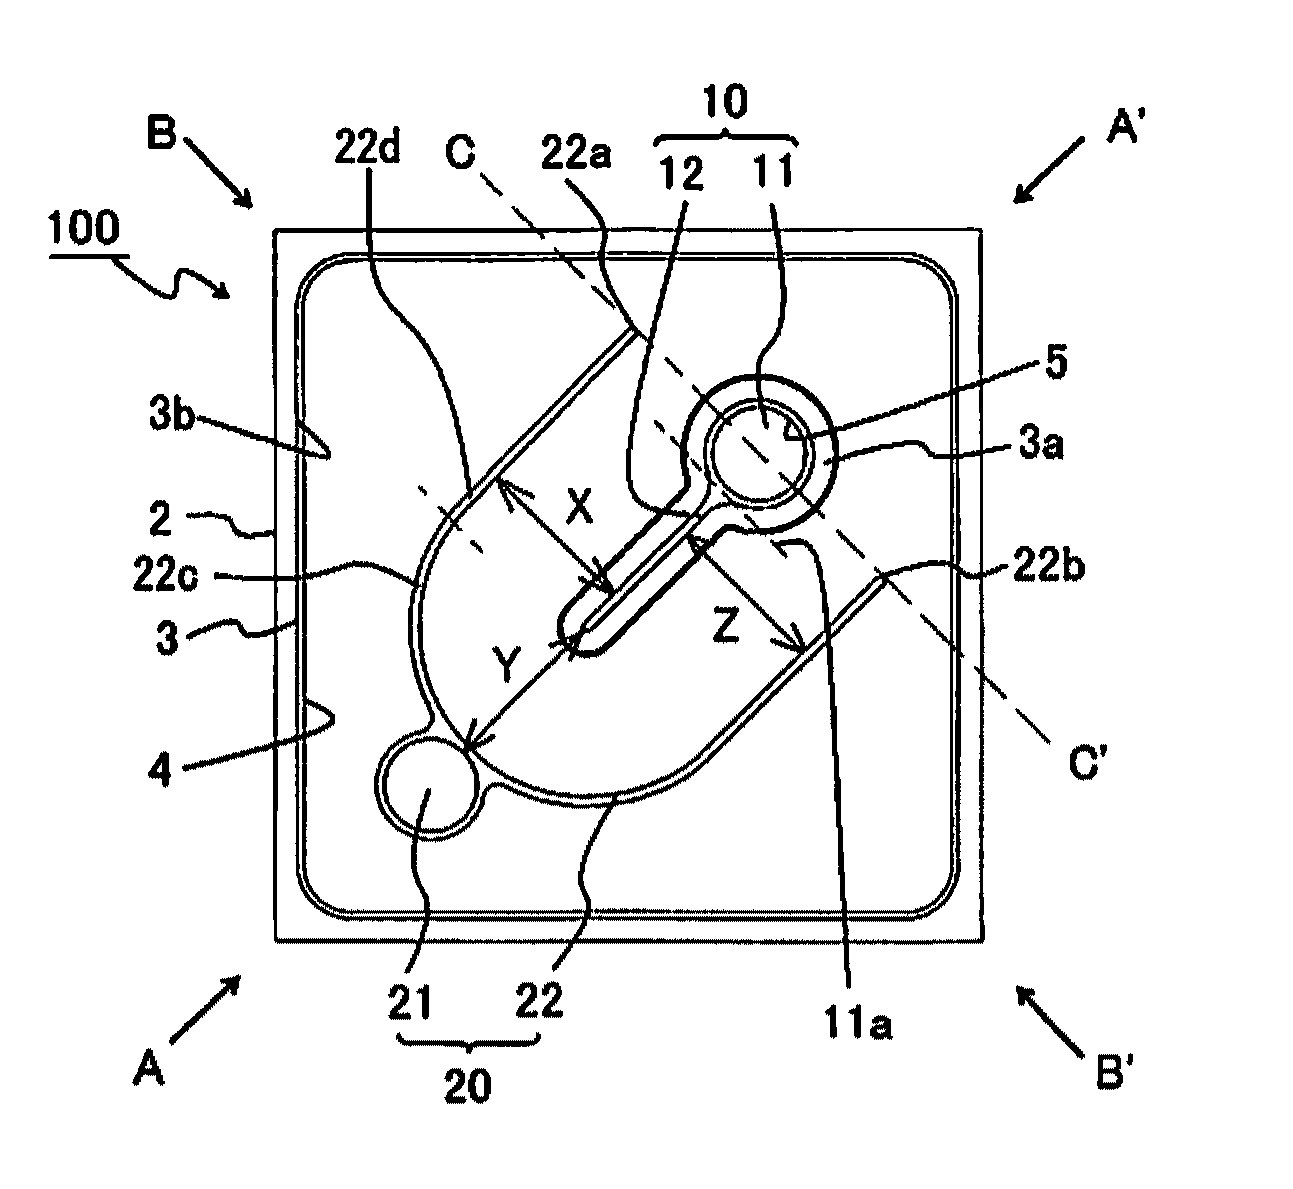 Light emitting element including first electrode with first connecting portion and first extending portion, and second electrode with second connecting portion and two second extending portions